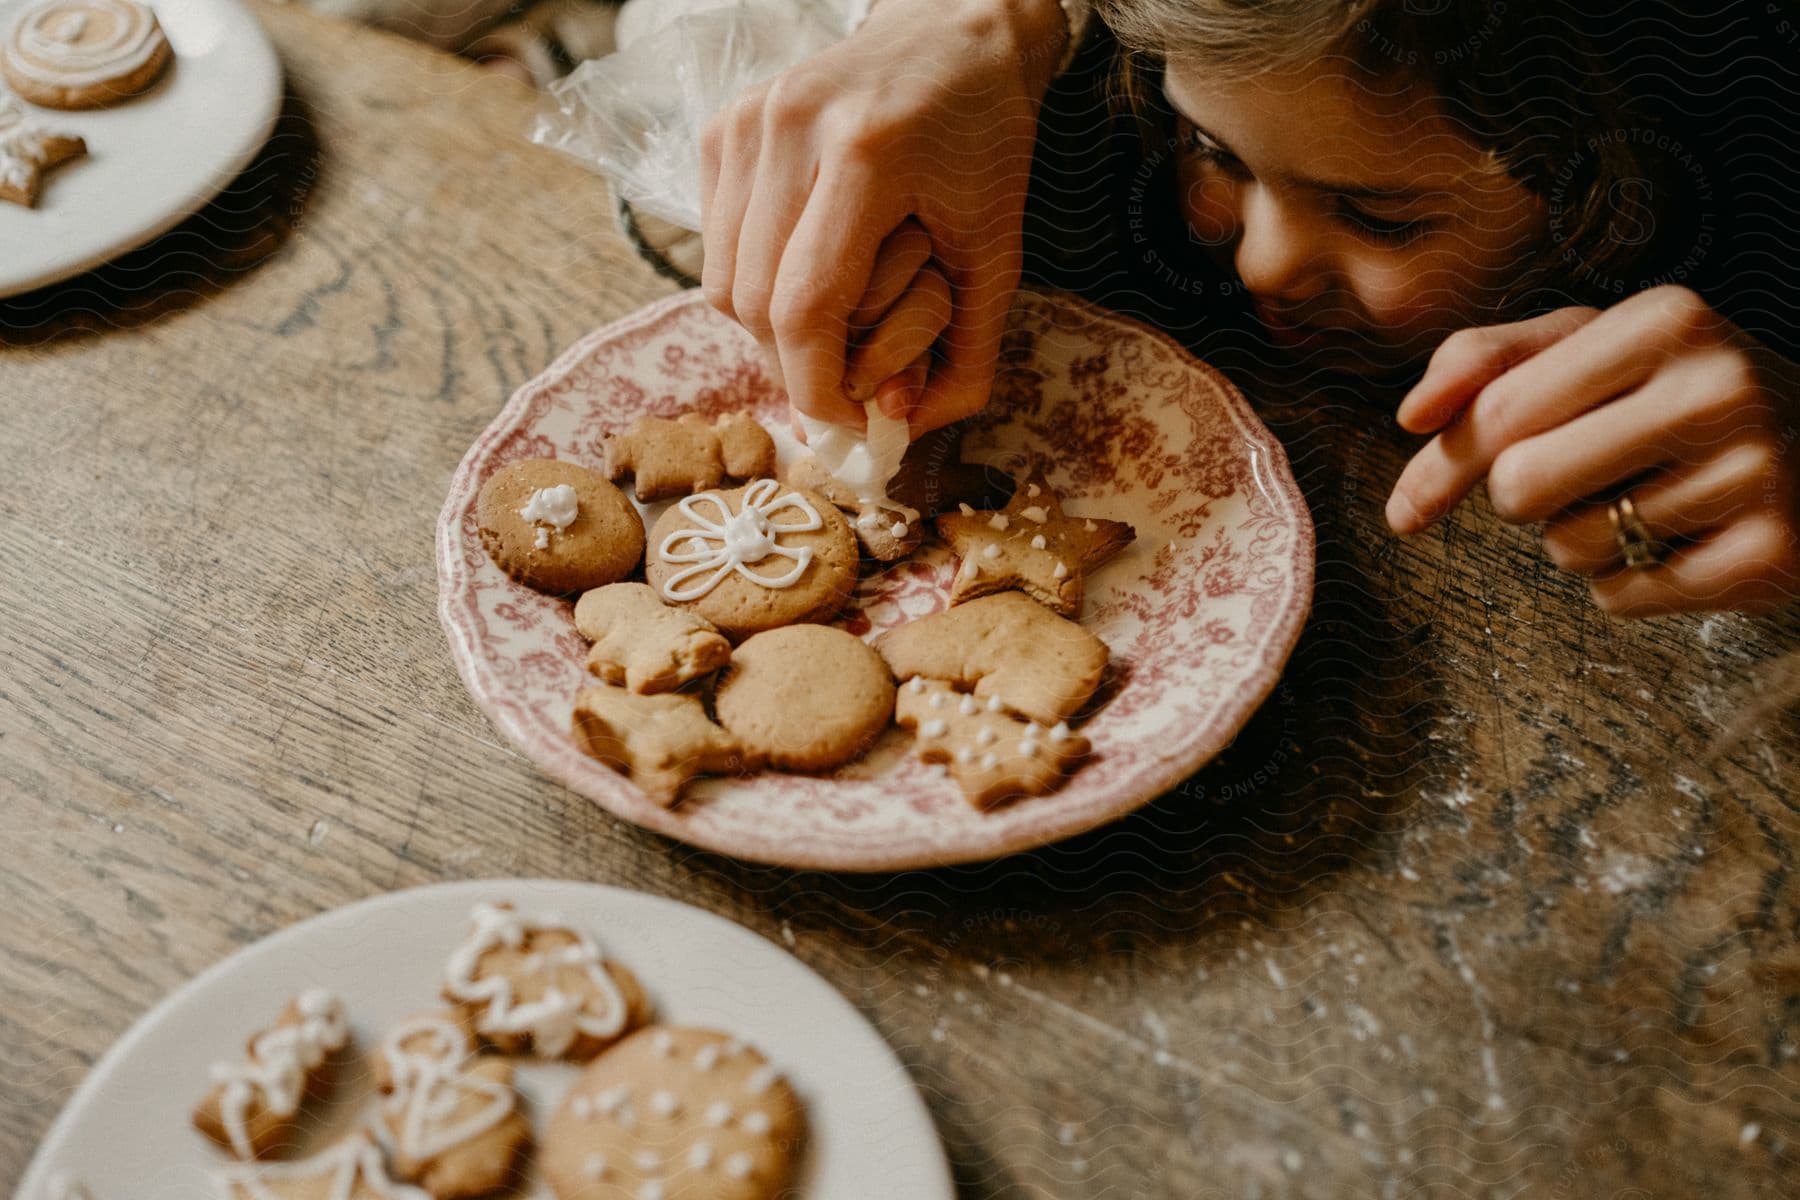 A girl with a plate of cookies on the wooden table.